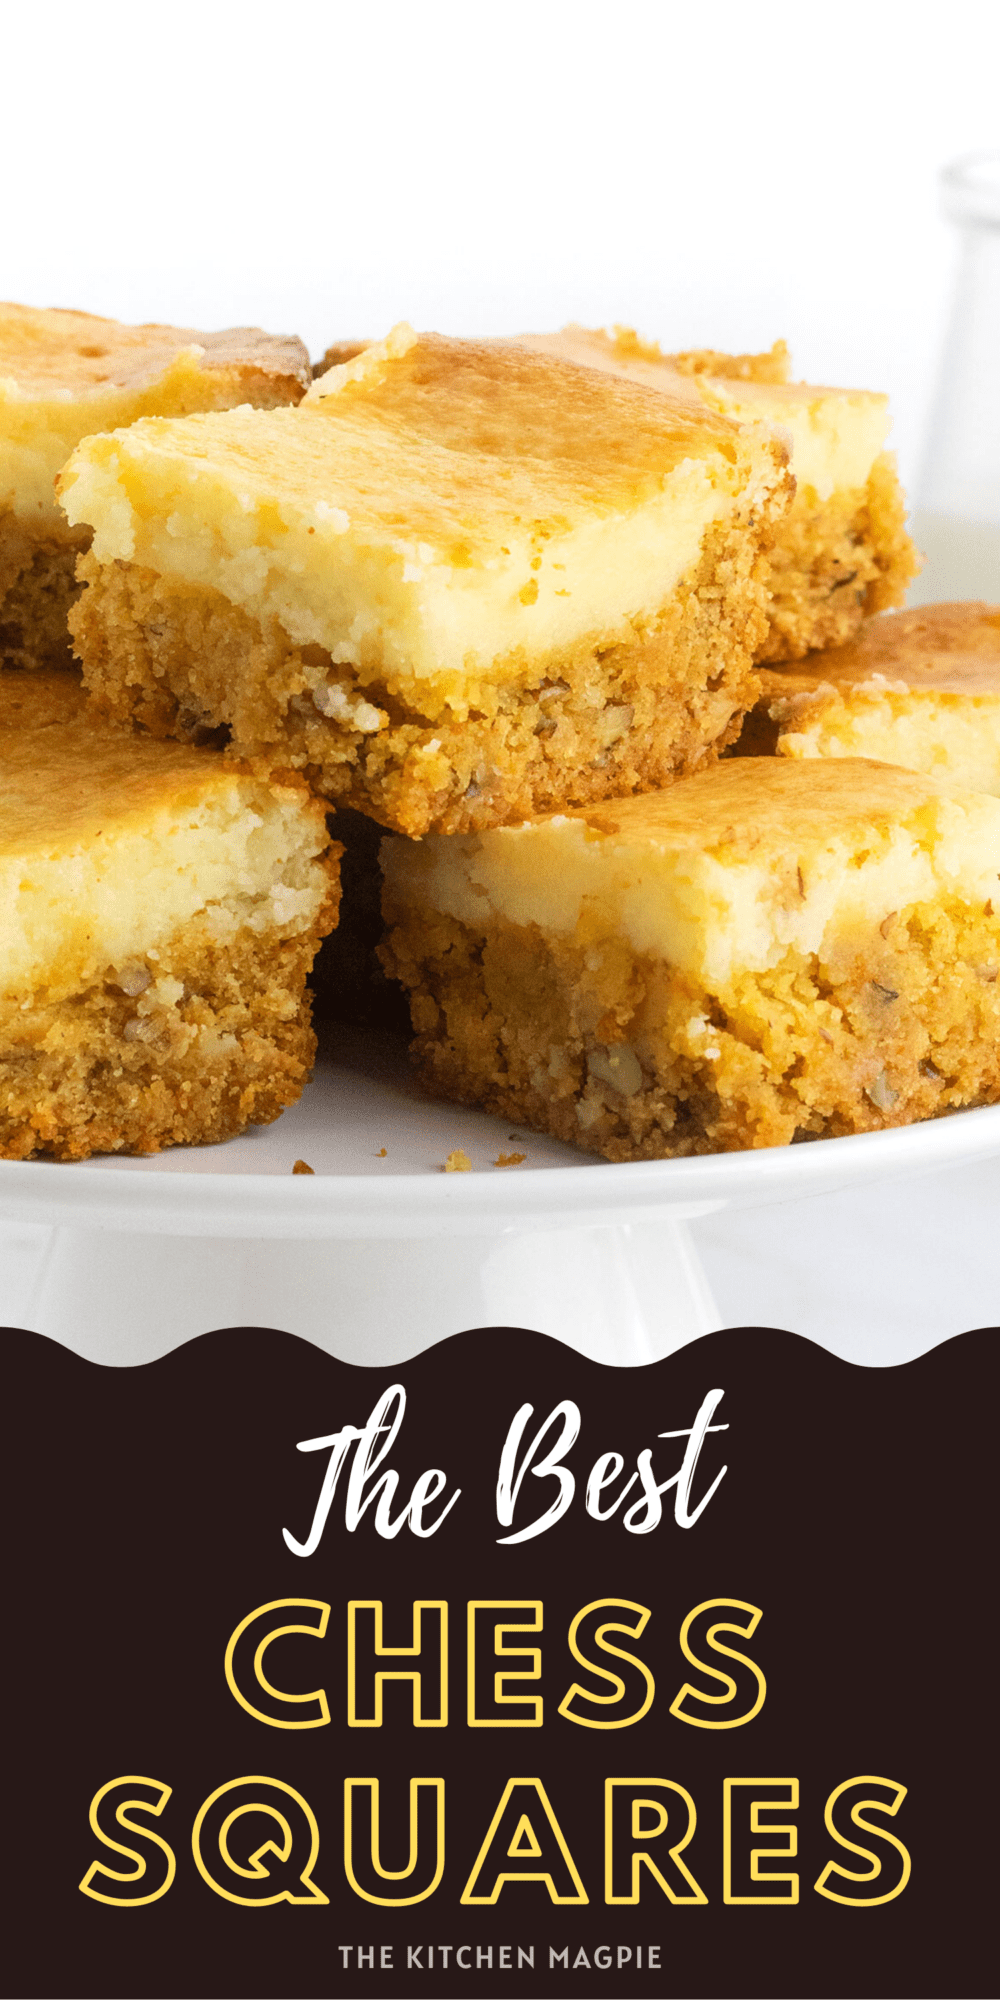 Classic Southern chess squares - a pecan filled yellow cake bottom that has a delicious cream cheese topping and slices into perfect squares!